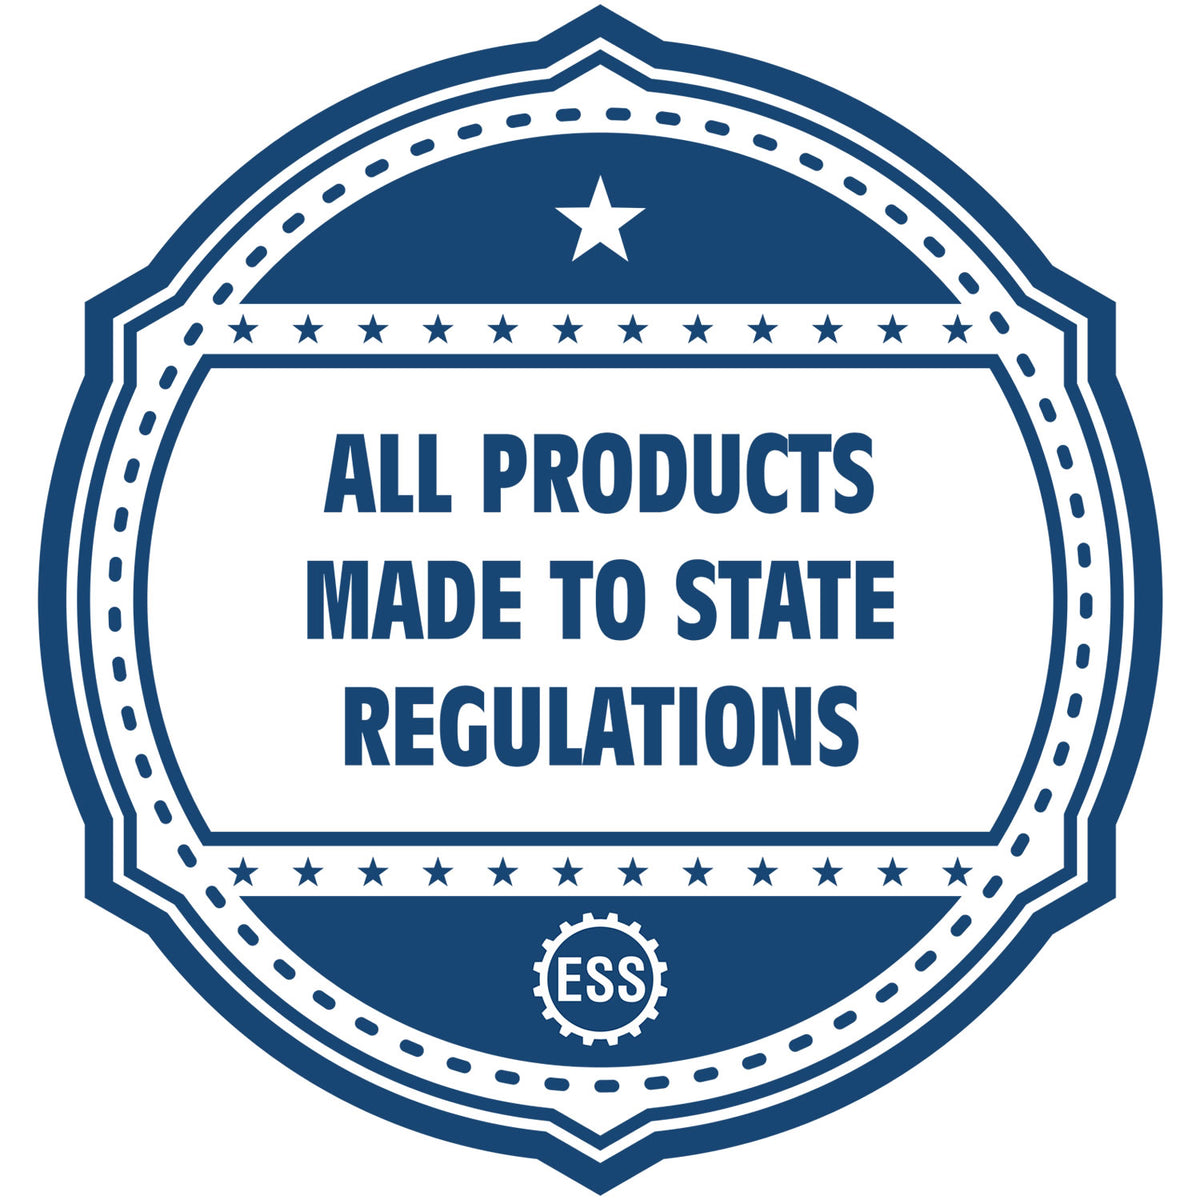 A blue icon or badge for the Hybrid Mississippi Engineer Seal showing that this product is made in compliance with state regulations.